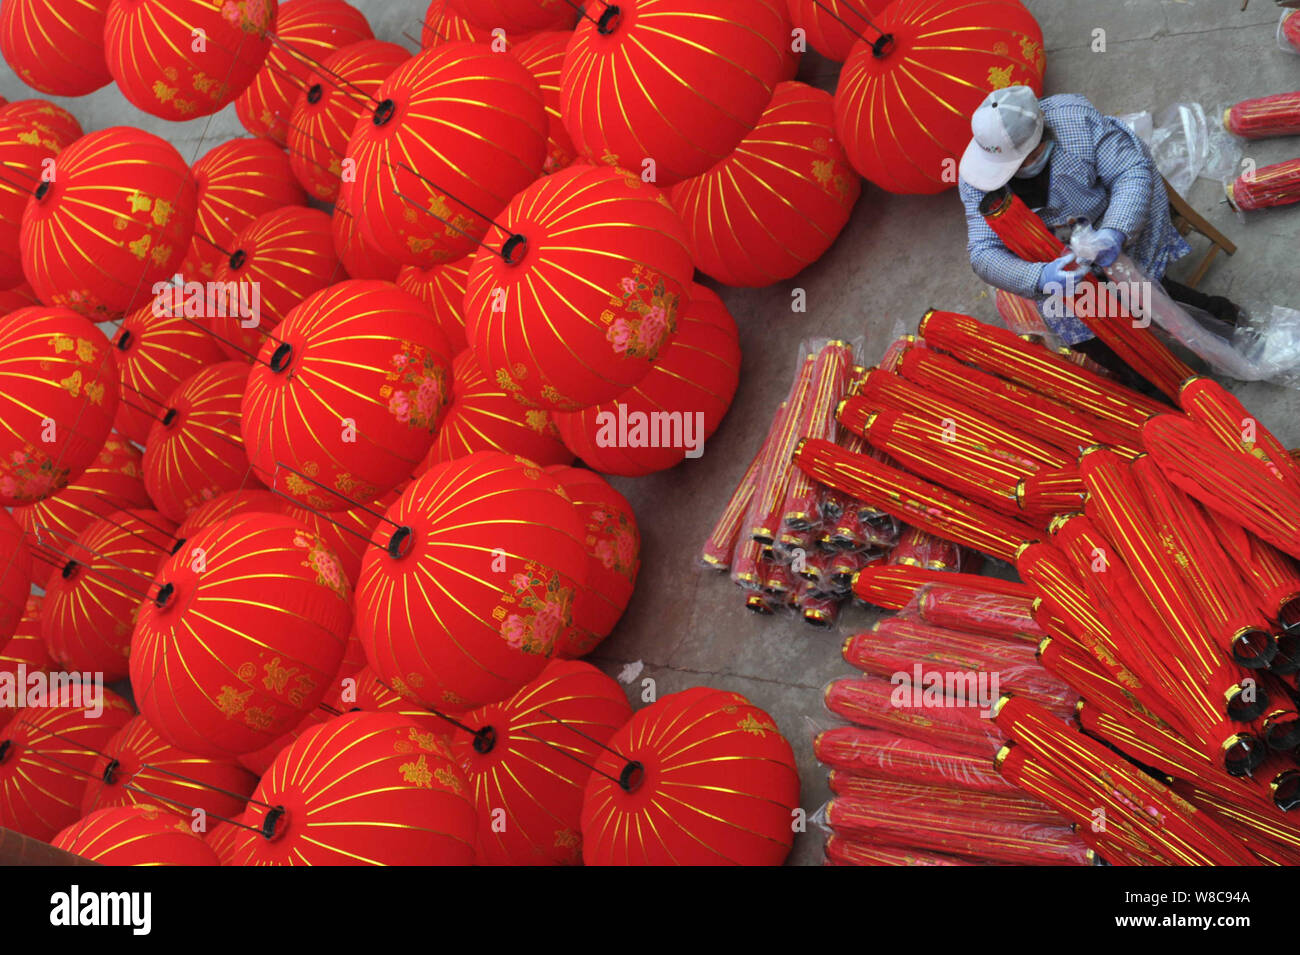 A Chinese worker packages lanterns after finishing production in a lantern workshop in Yuncheng city, north China's Shanxi province, 20 December 2015. Stock Photo